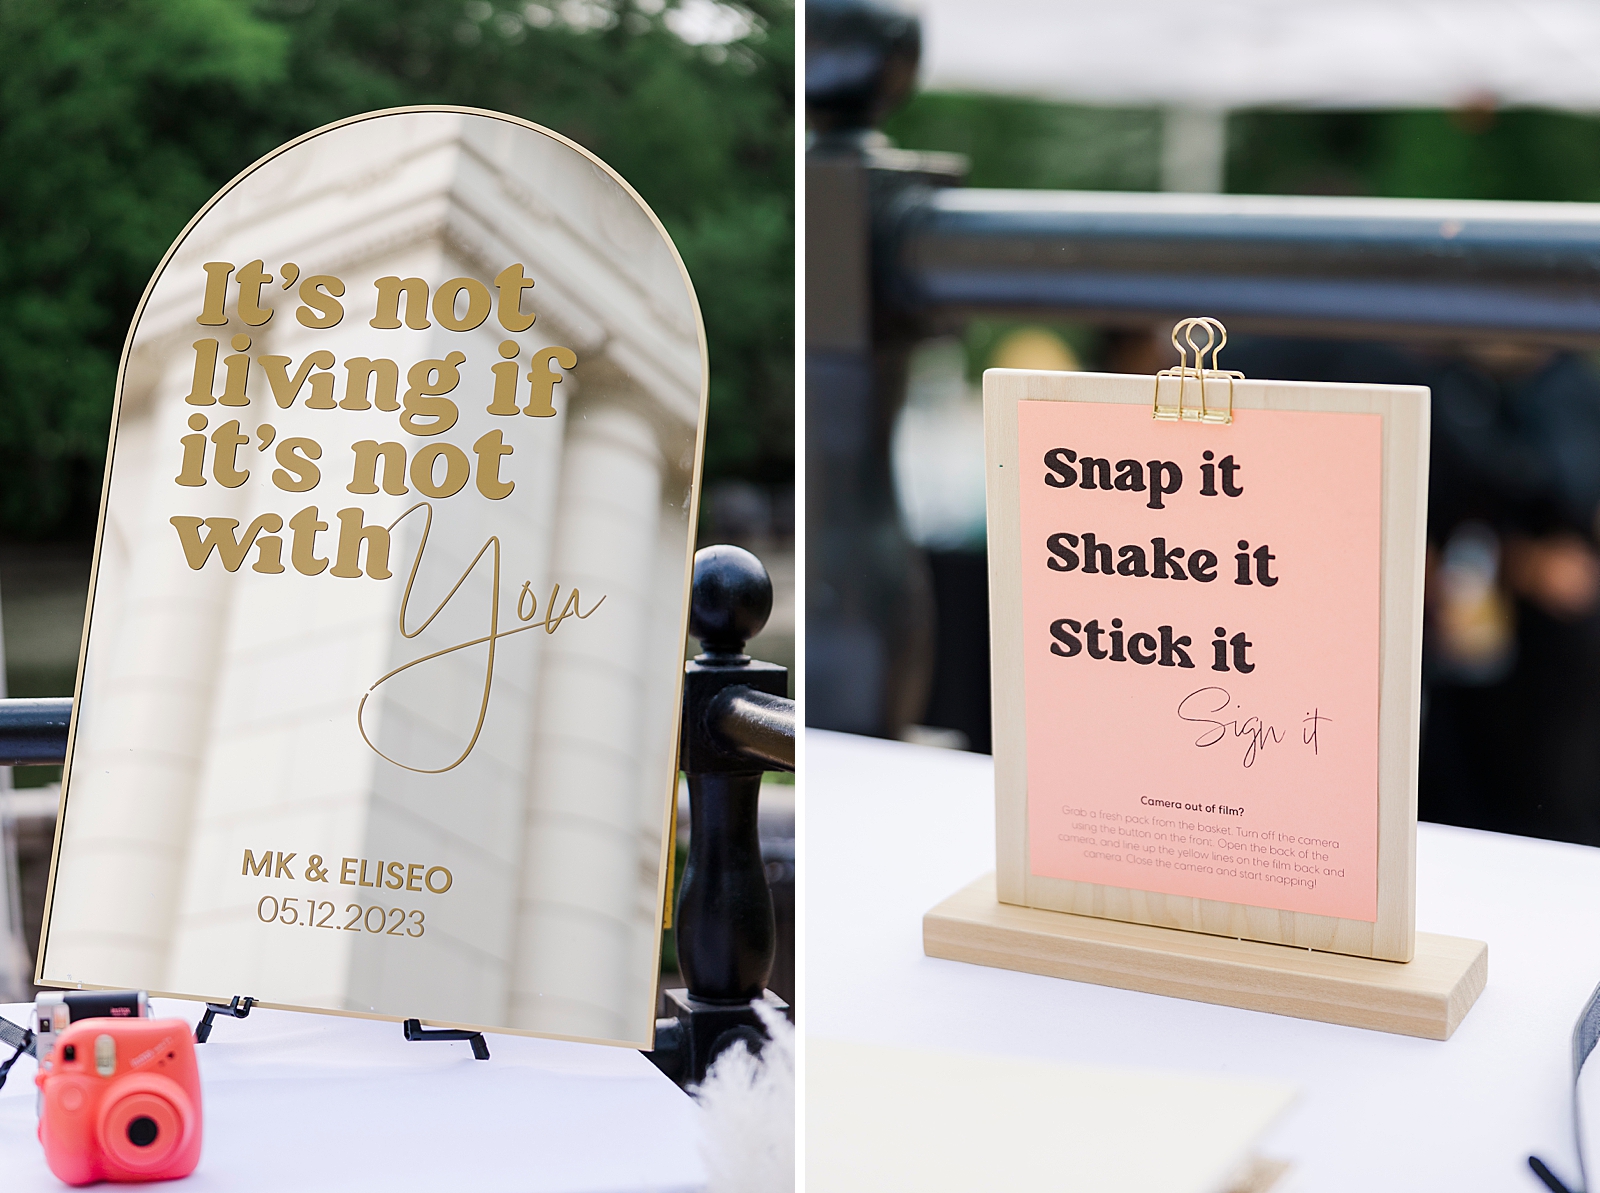 Left: Photo of a sign that says, "it's not living if it's not with you," as well as MK and Eliseo's names and their wedding date. 
Right: Photo of a sign that says, "snap it, shake it, stick it, sign it." 